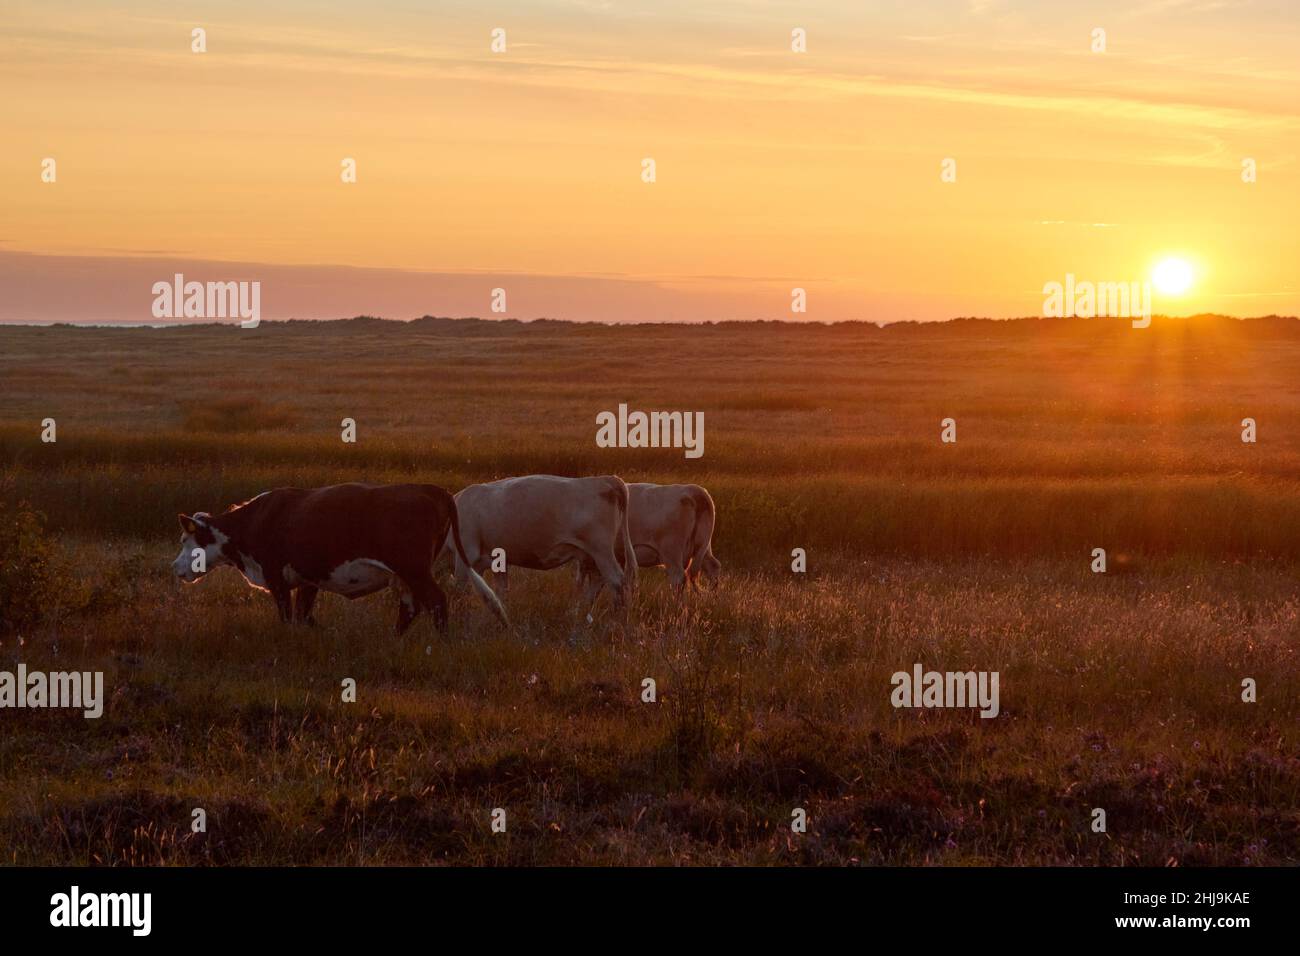 Cows in a field with setting sun; Laesoe, Denmark Stock Photo